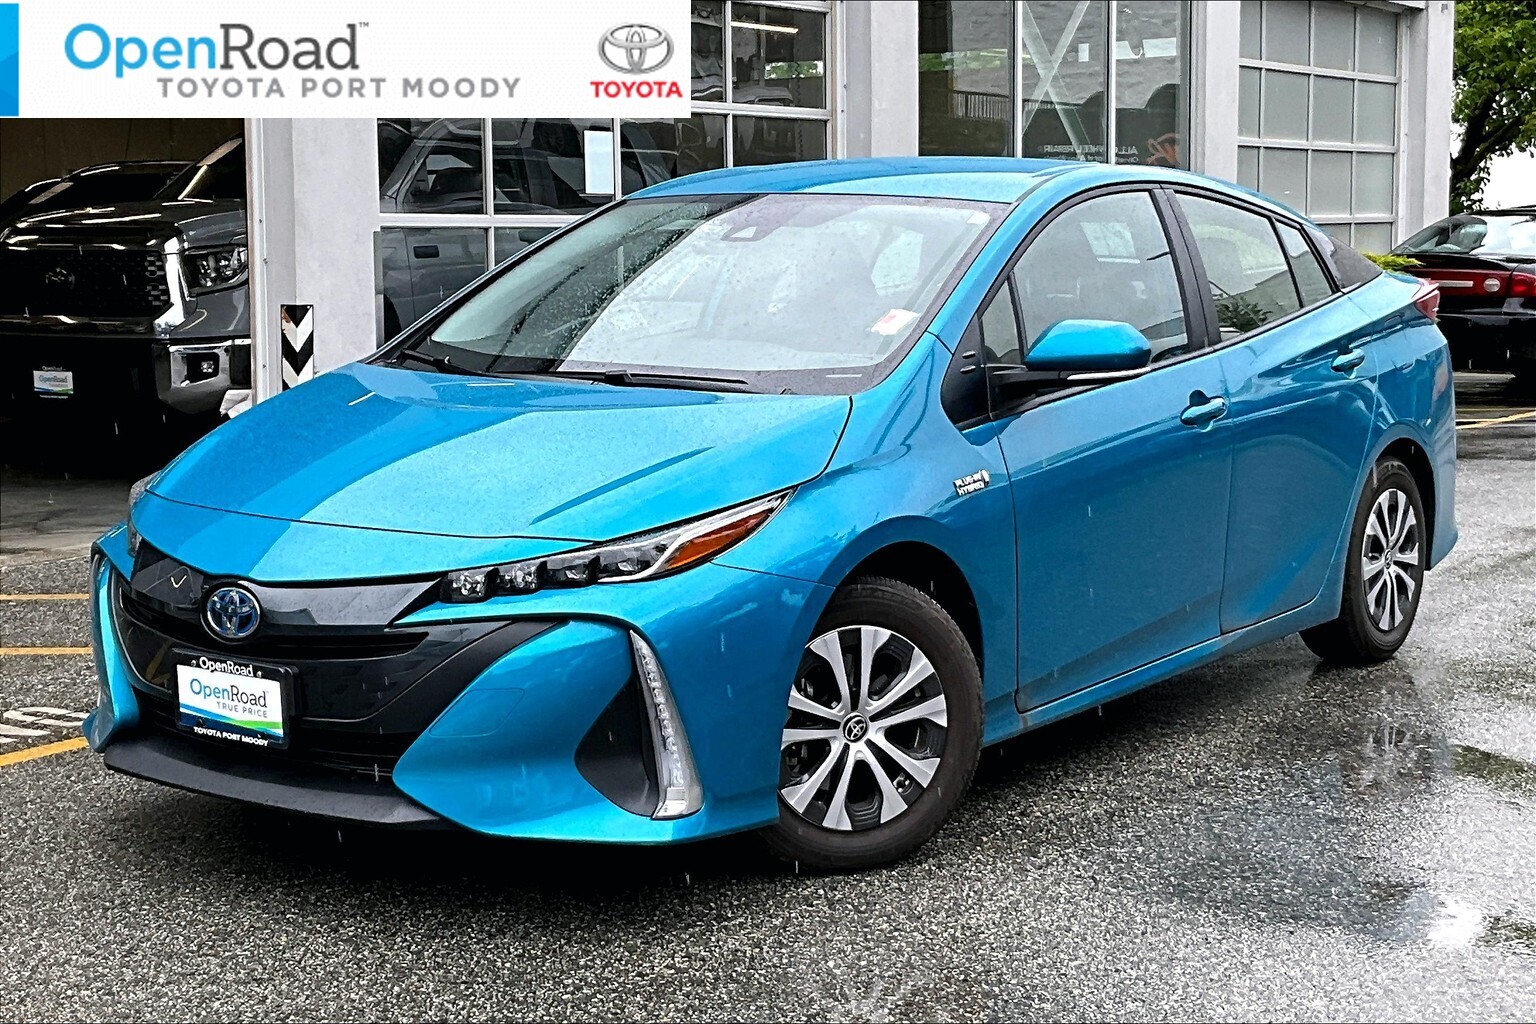 2022 Toyota Prius Prime |OpenRoad True Price |Local |One Owner |No Claims 